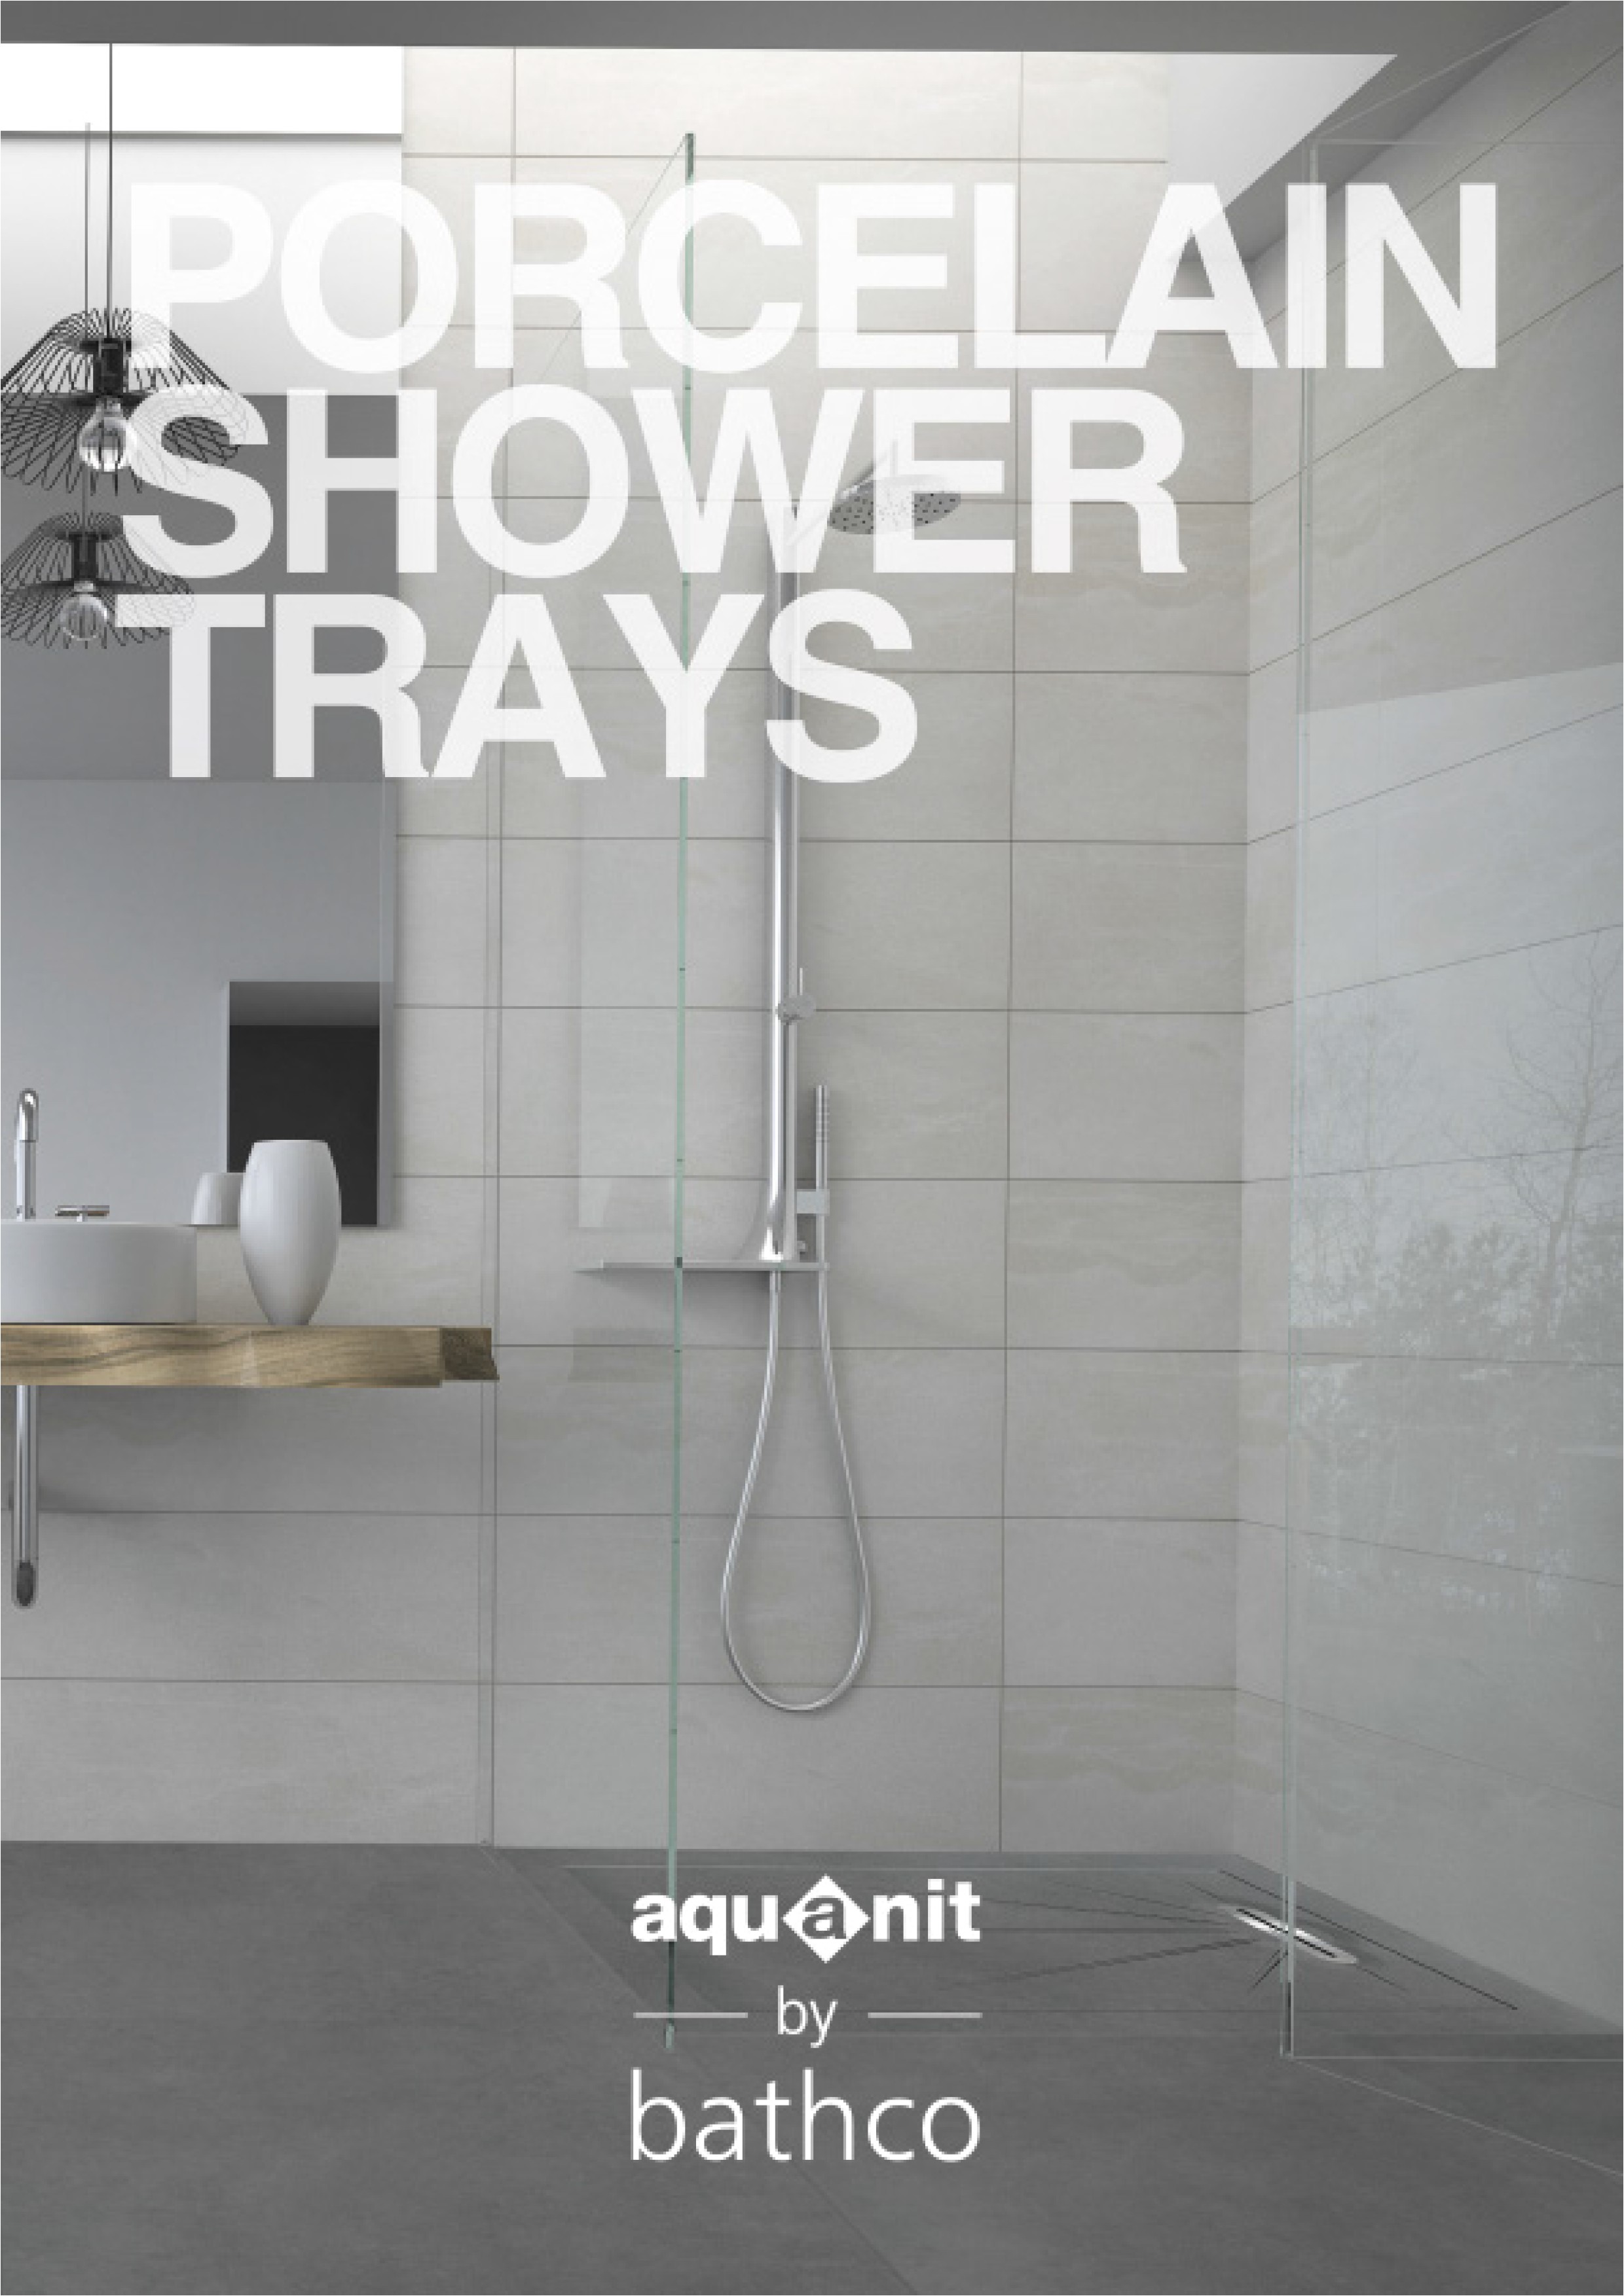 new porcelain shower trays catalogue bathco by aquanit